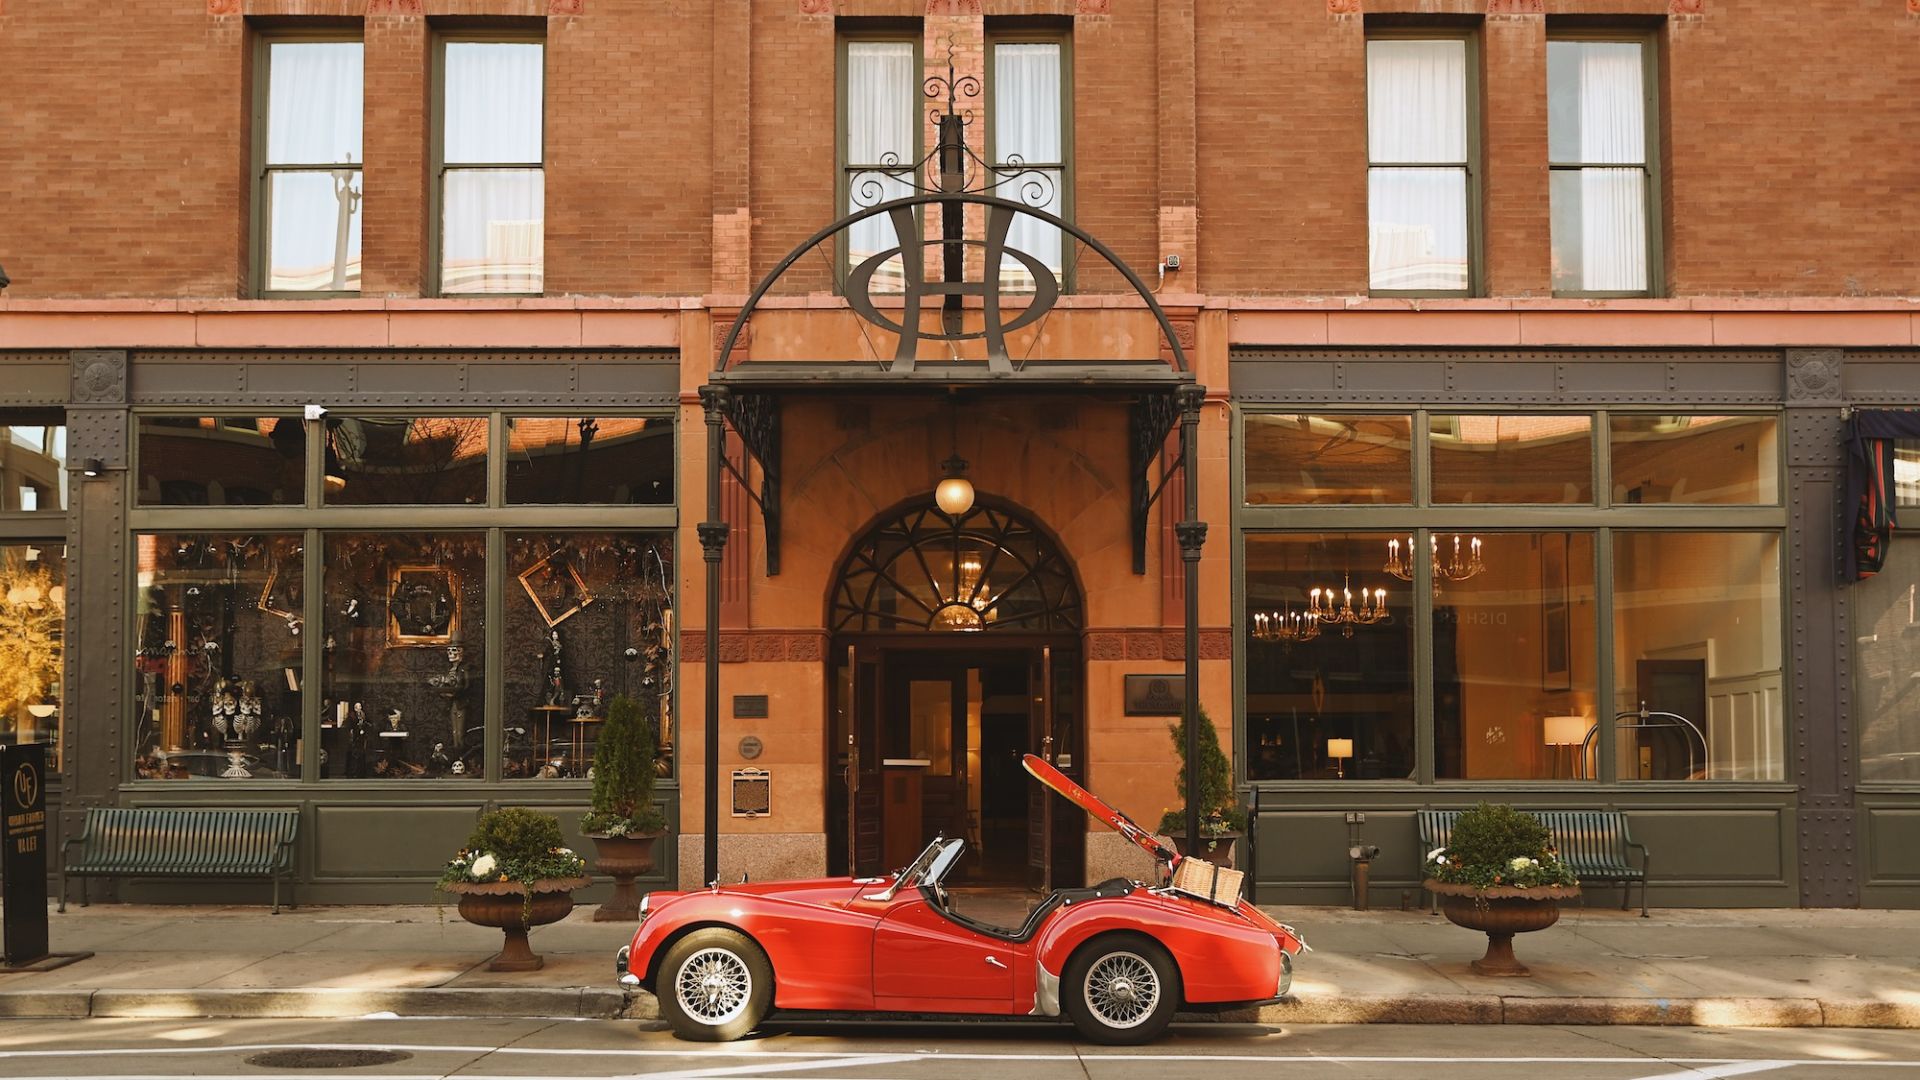 A Red Sports Car Parked In Front Of A Building